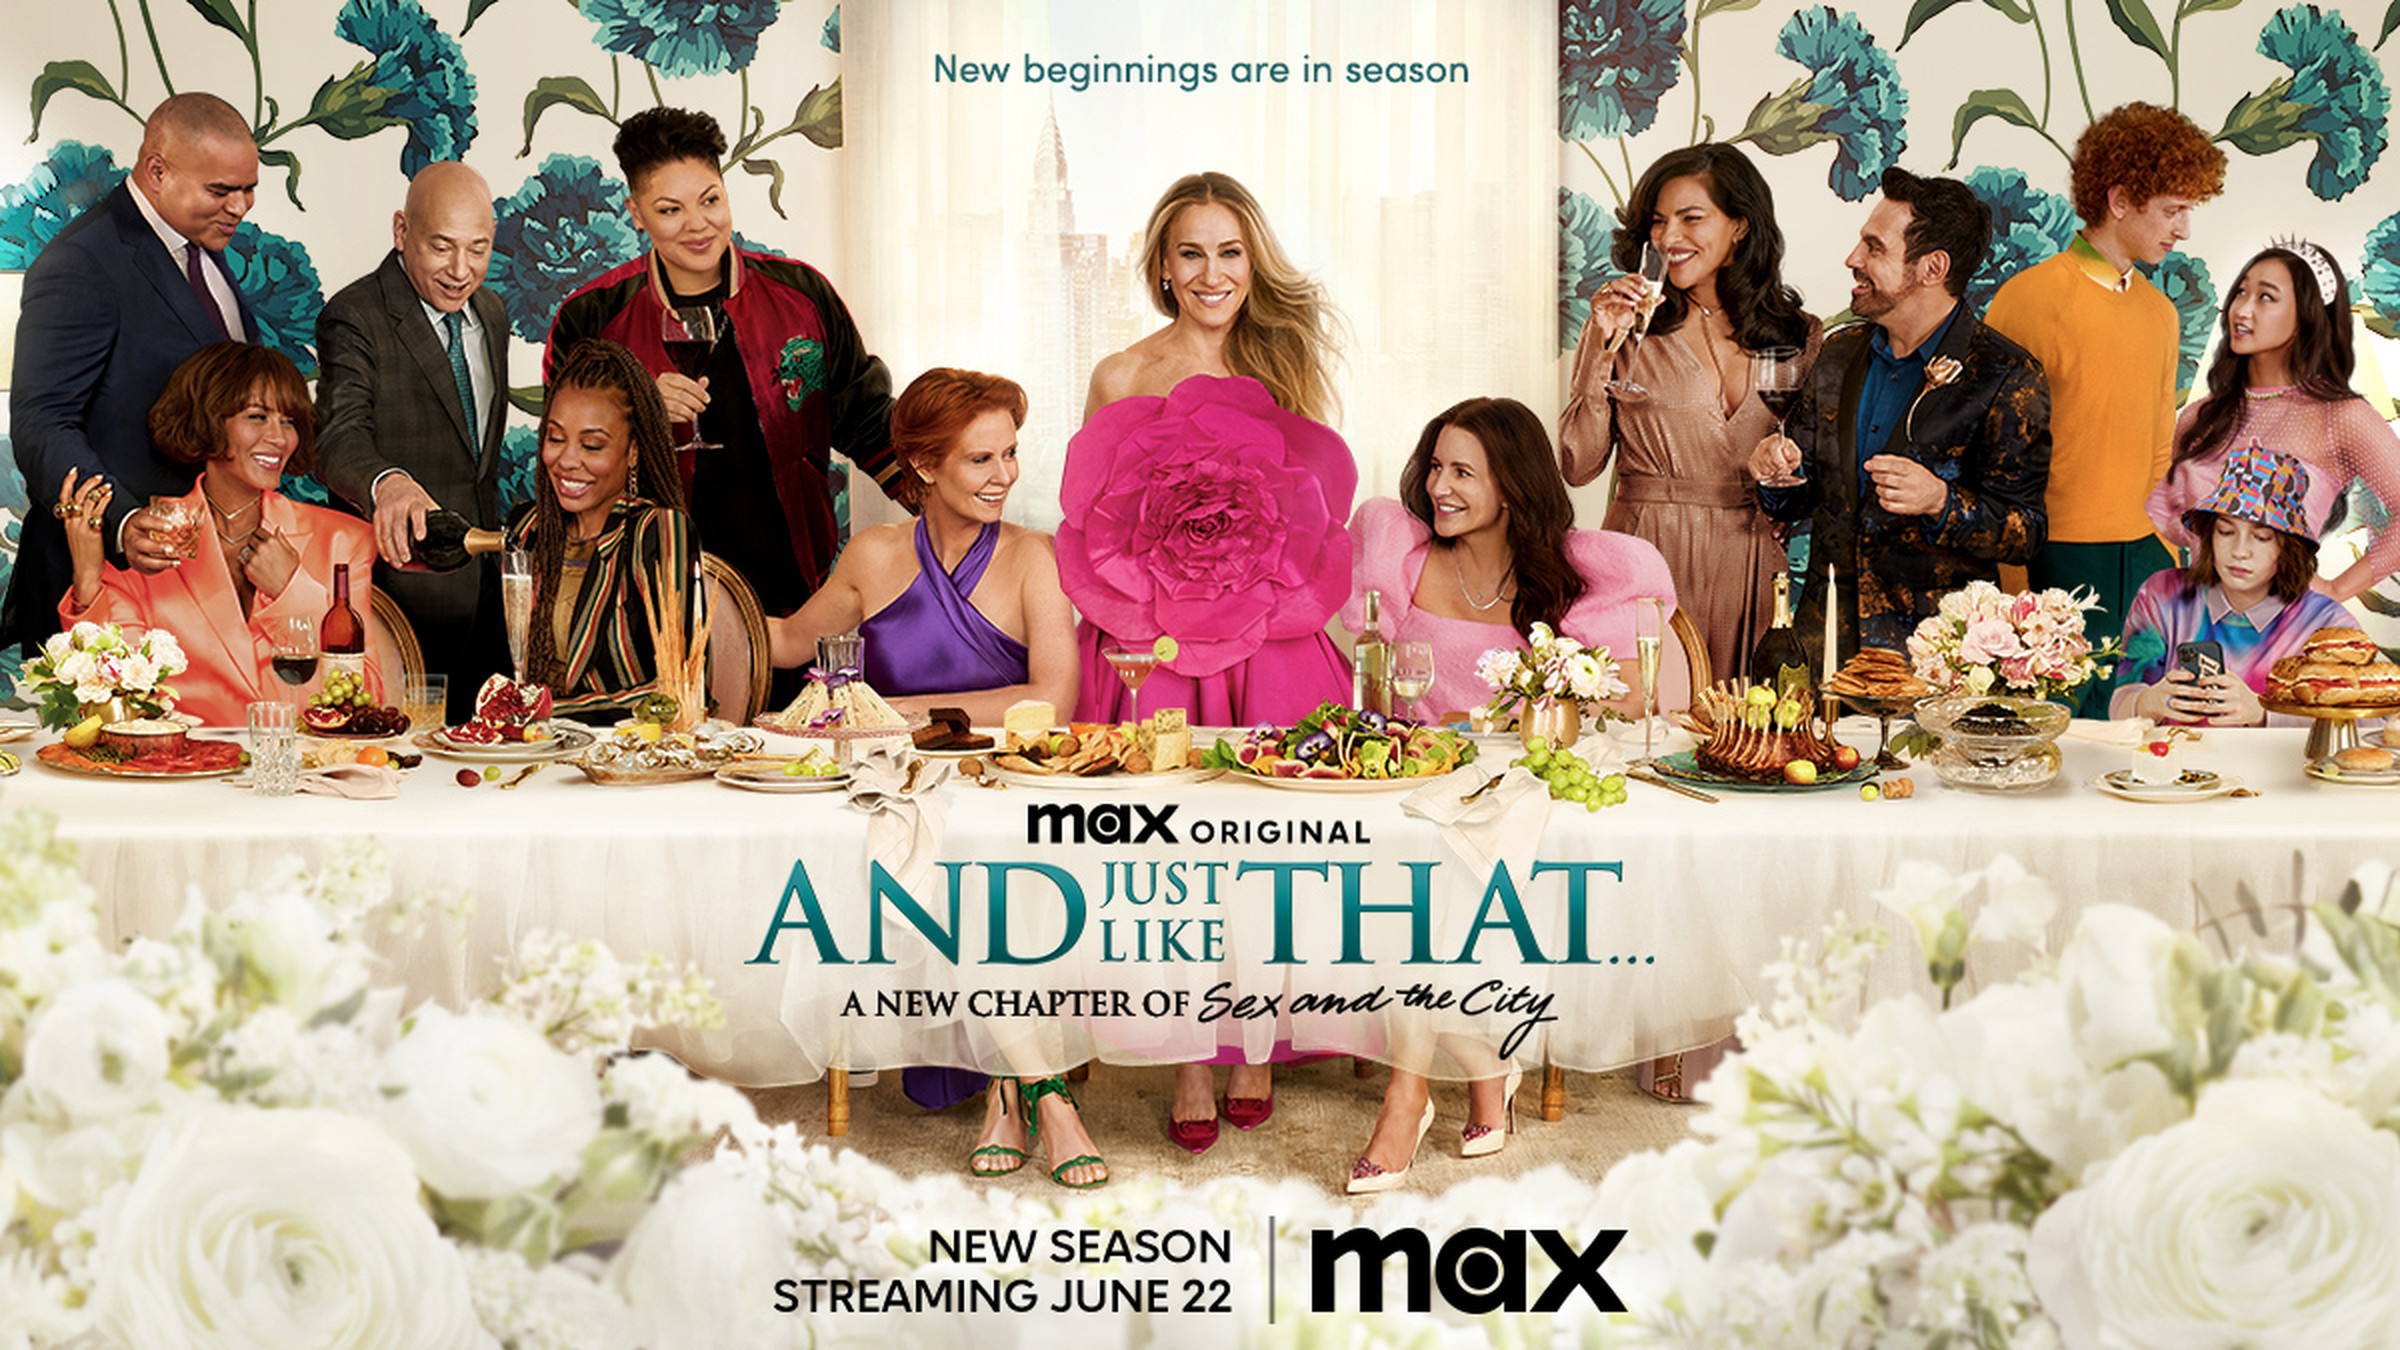 An assortment of characters from Sex and the City, and And Just Like That sitting at a table styled to resemble The Last Supper.